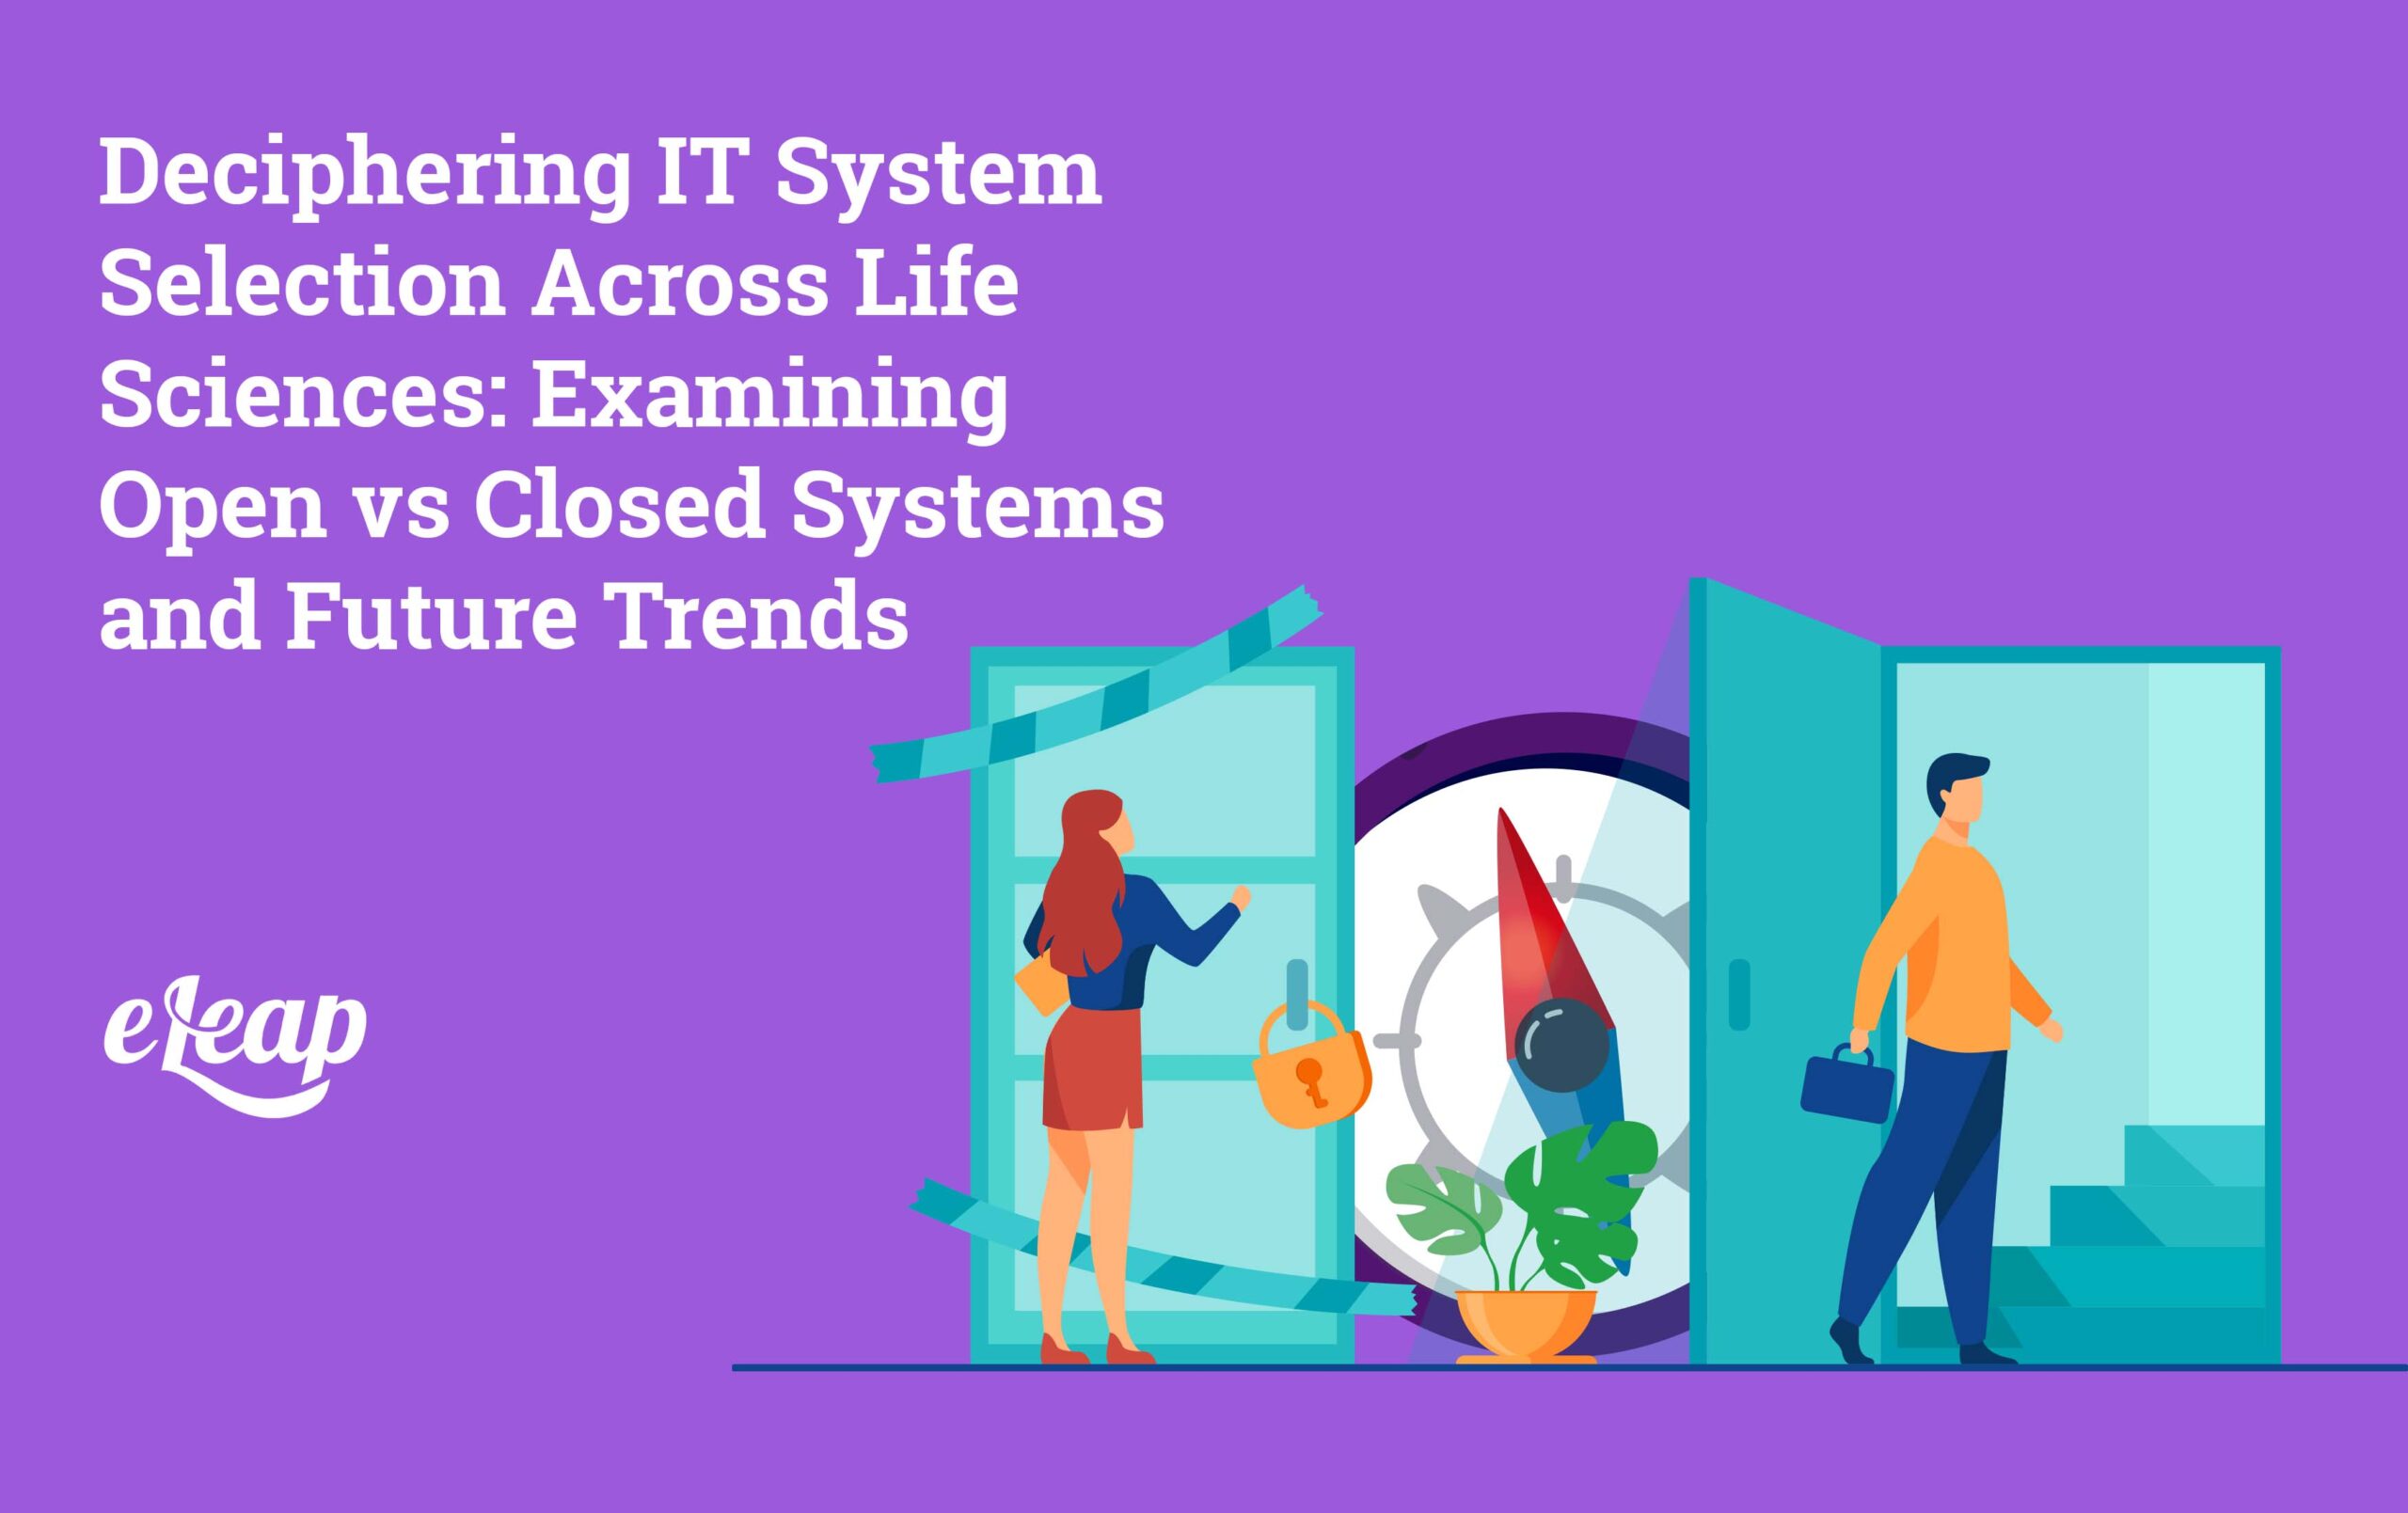 Examining Open vs Closed Systems and Future Trends